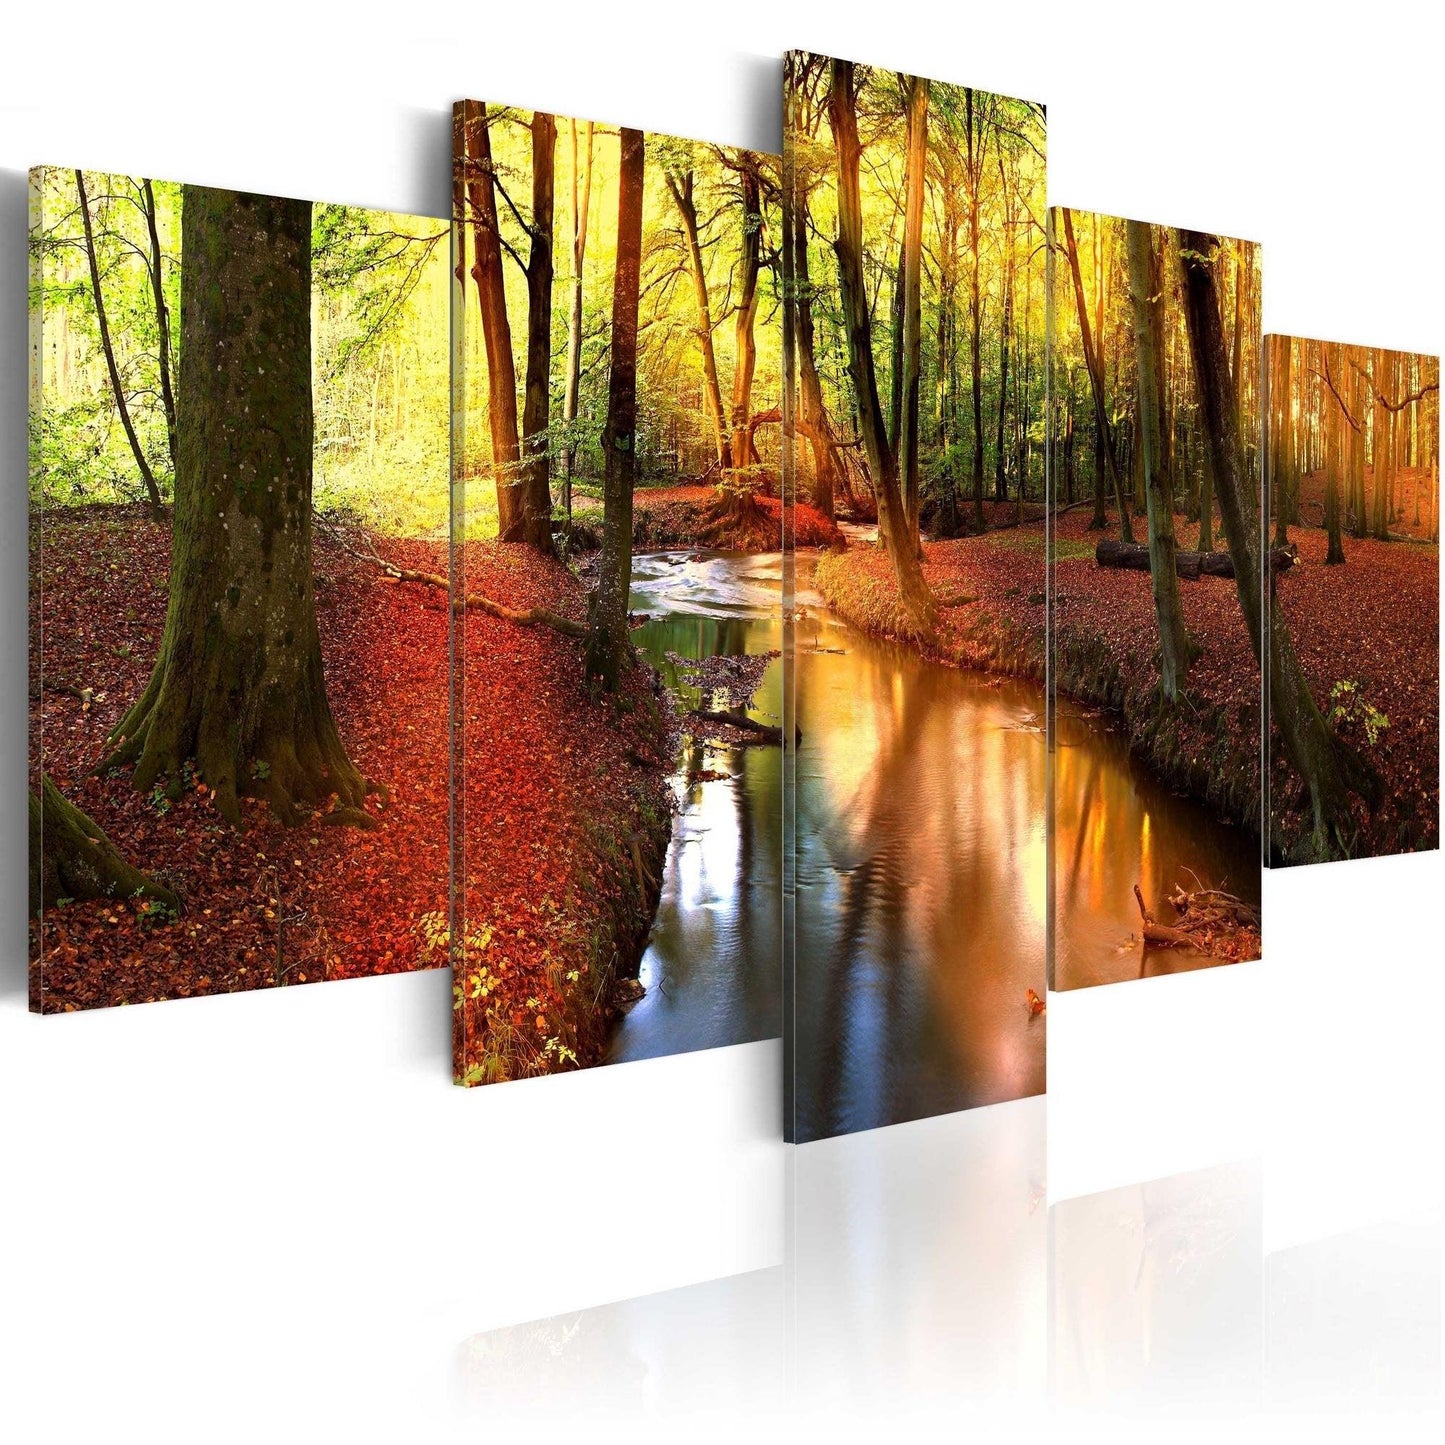 Canvas Print - Silent forest - www.trendingbestsellers.com